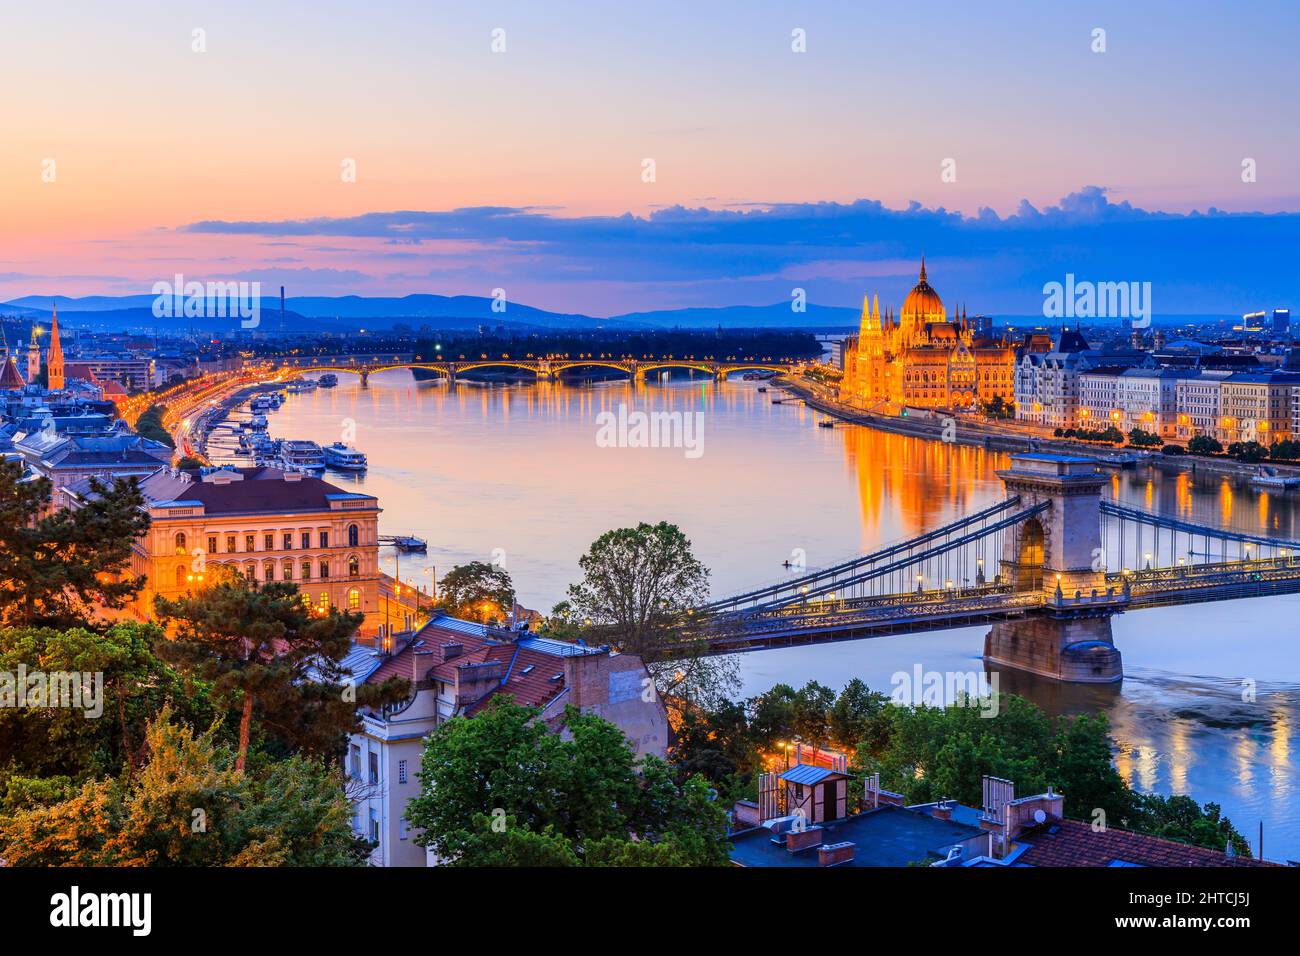 Budapest, Hungary. Panoramic view with the Chain Bridge and the Parliament on the Danube river. Stock Photo